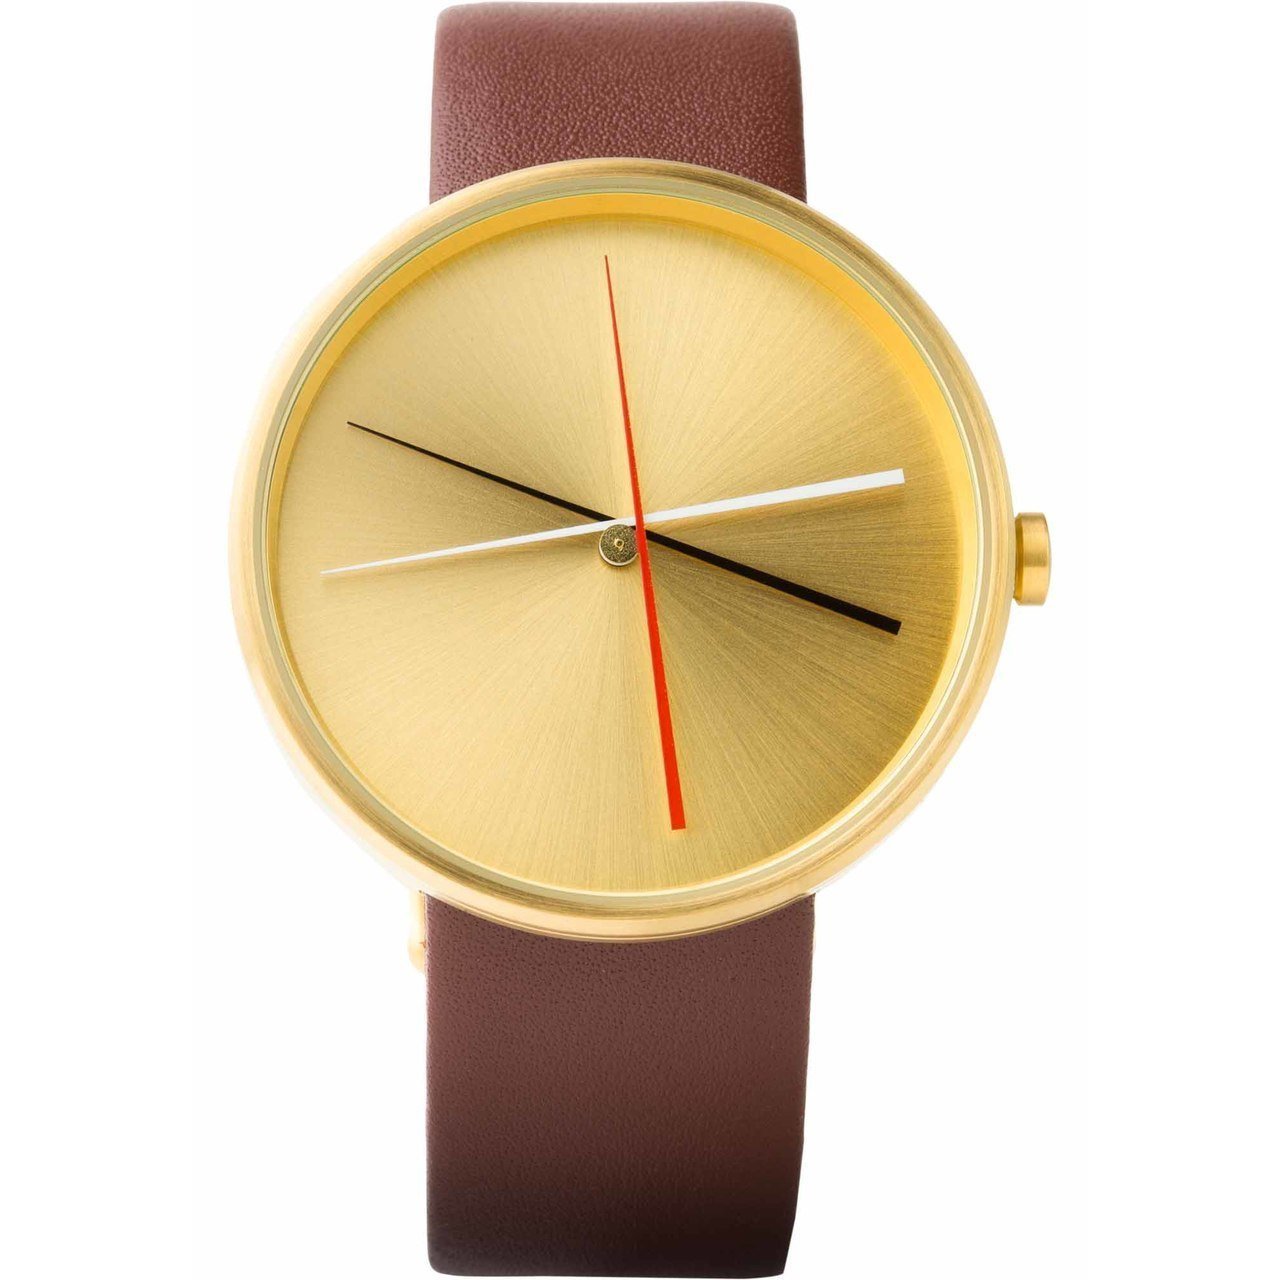 Projects Crossover Brass Pick Up Stix Watch